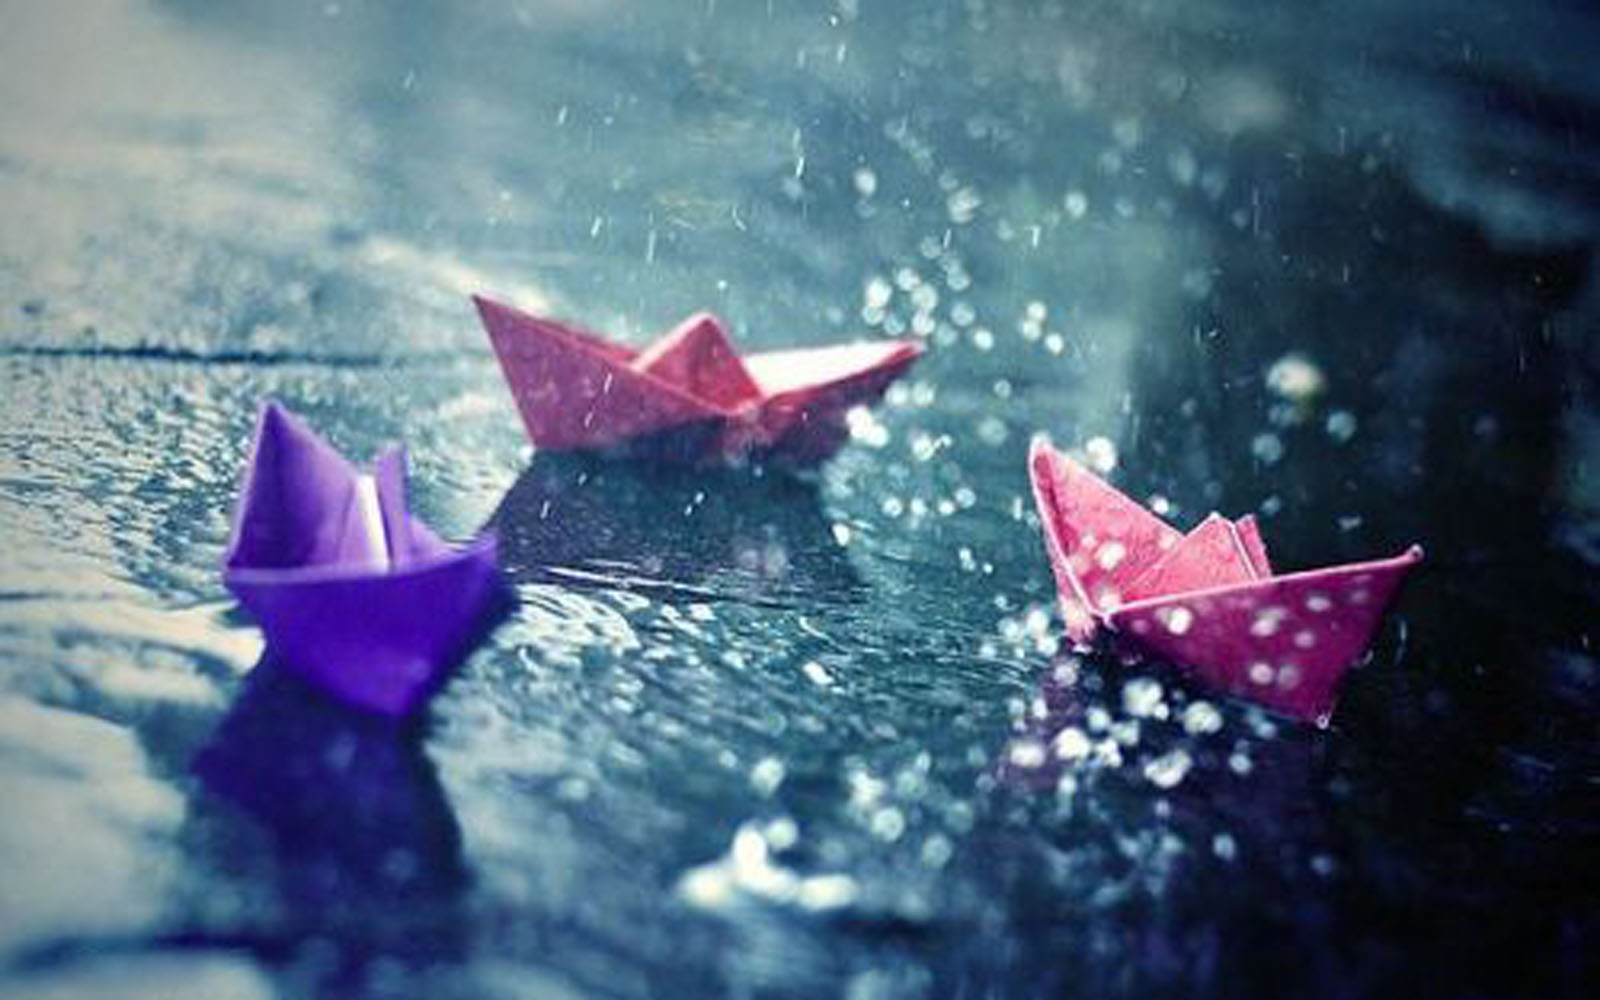 Rain HD Wallpaper Check Out The Cool